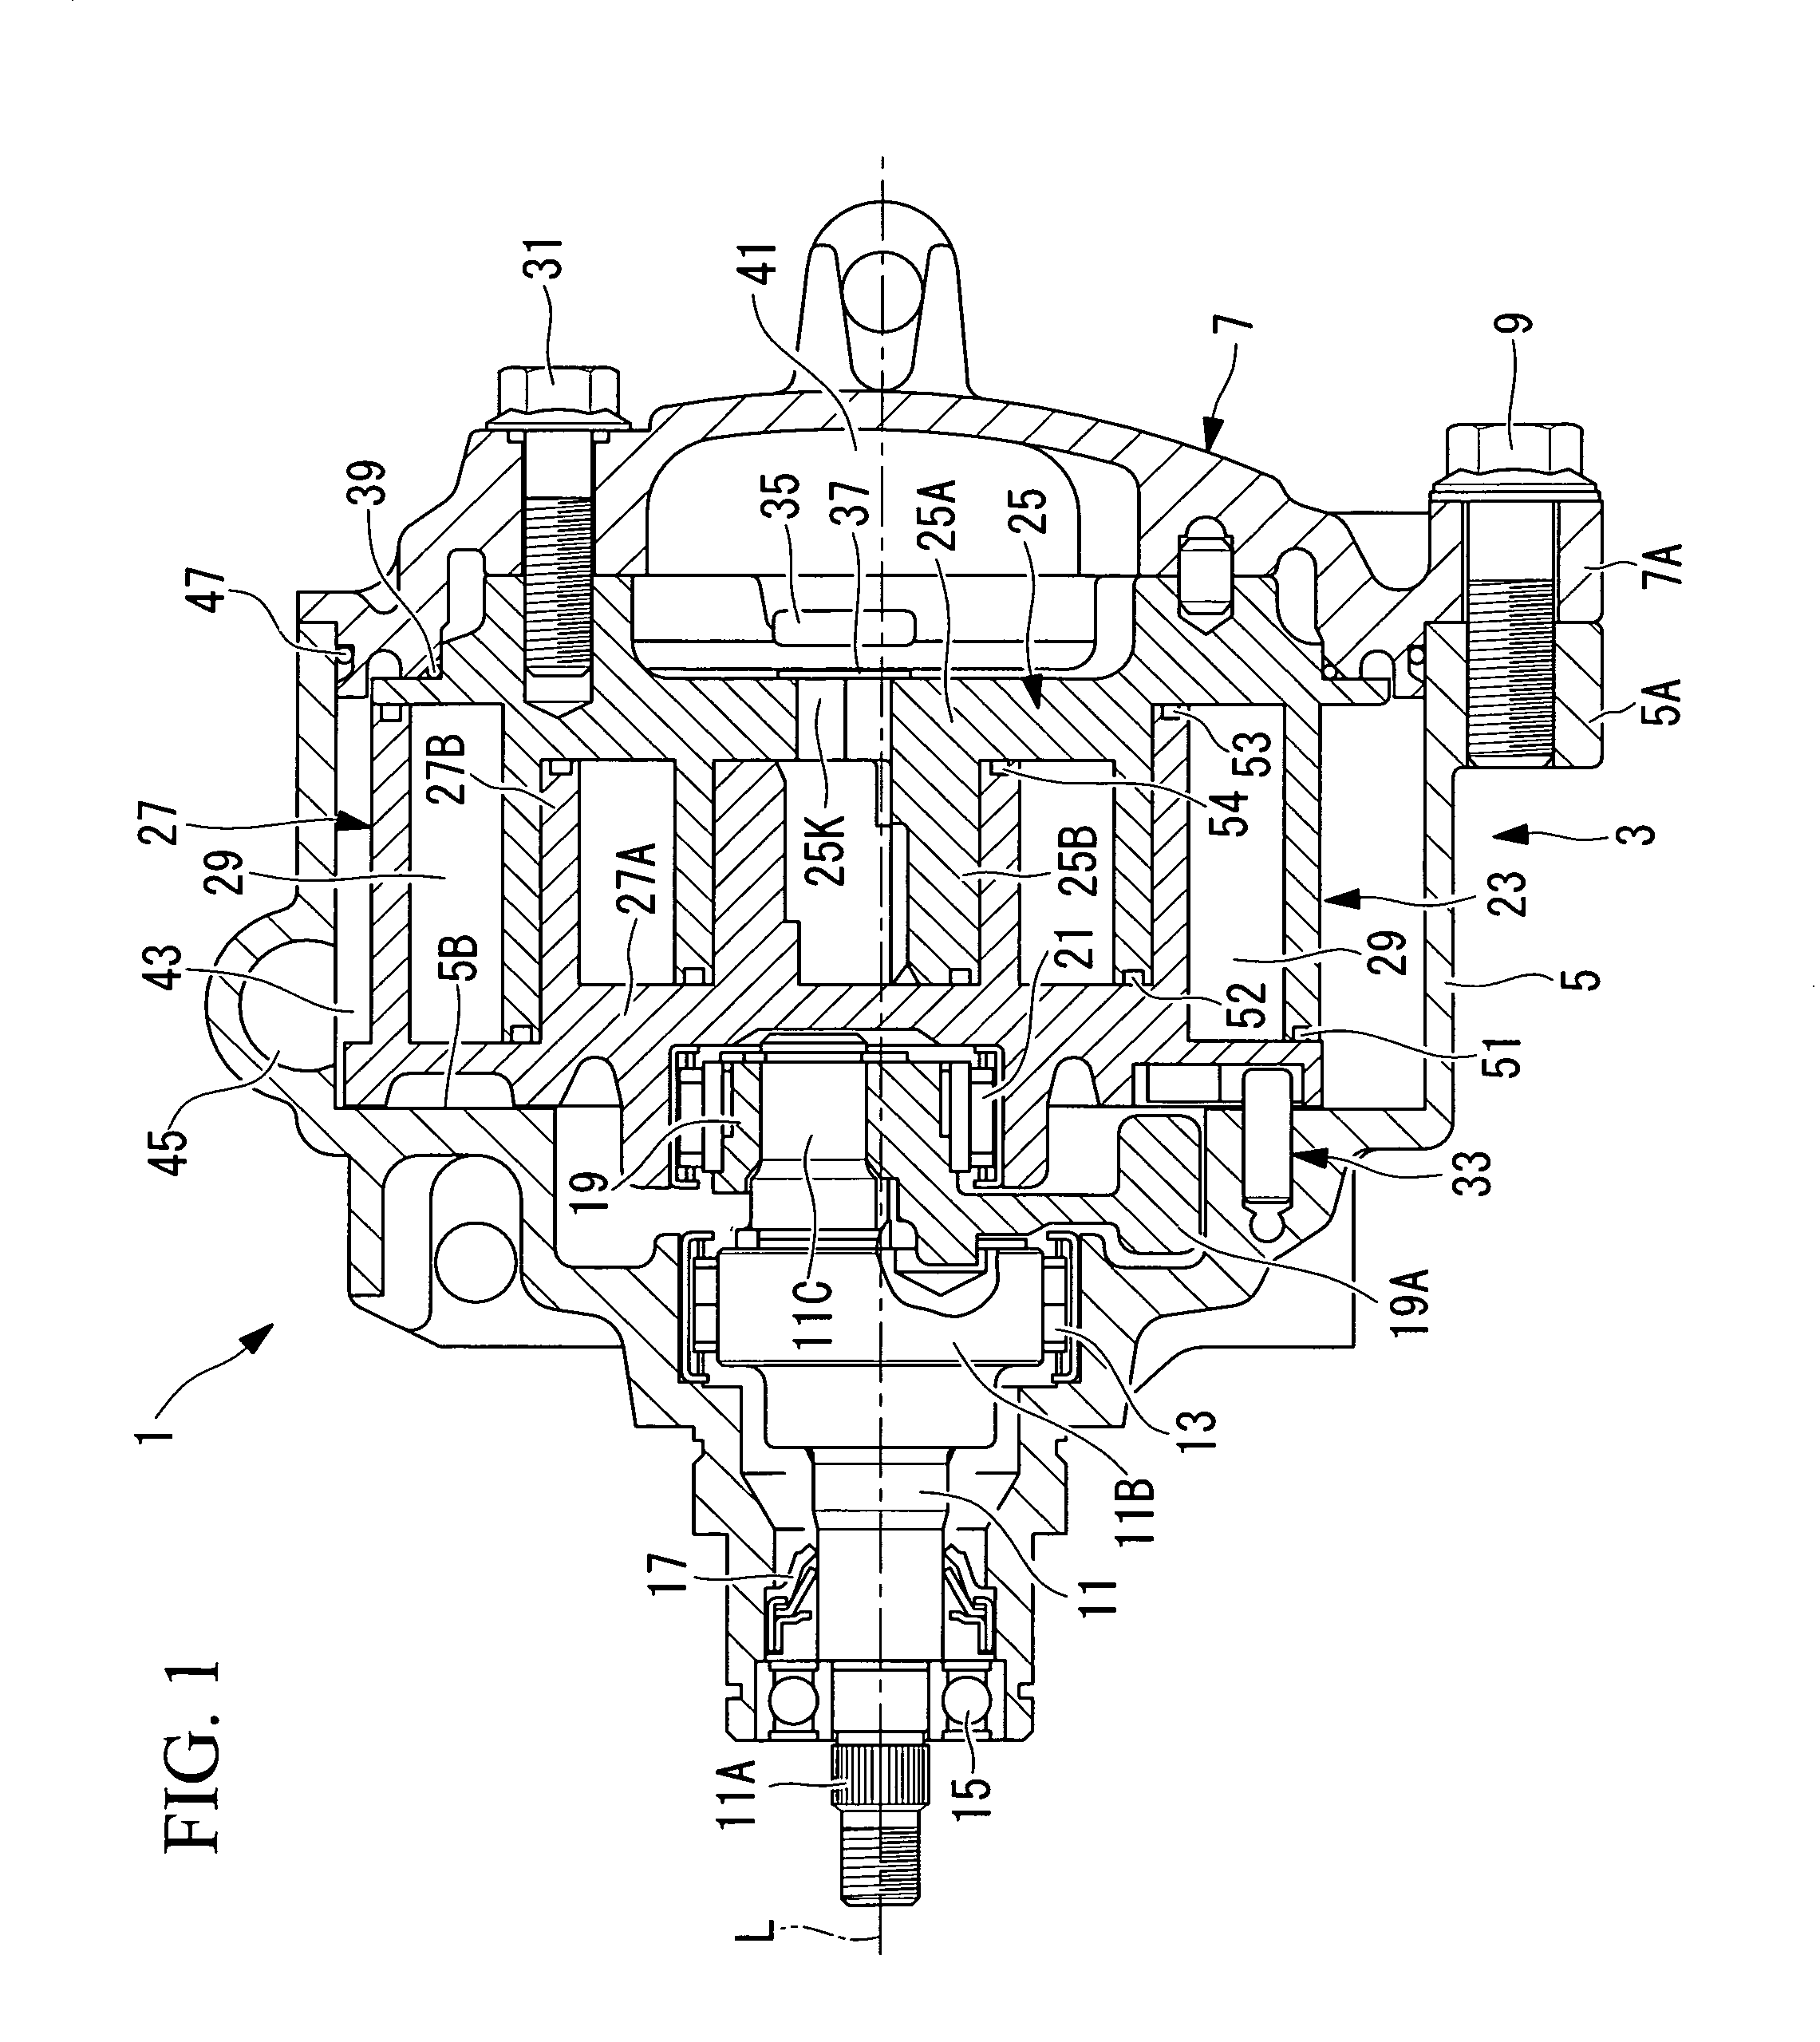 Scroll compressor for preventing performance deterioration and variation due to gas leakage